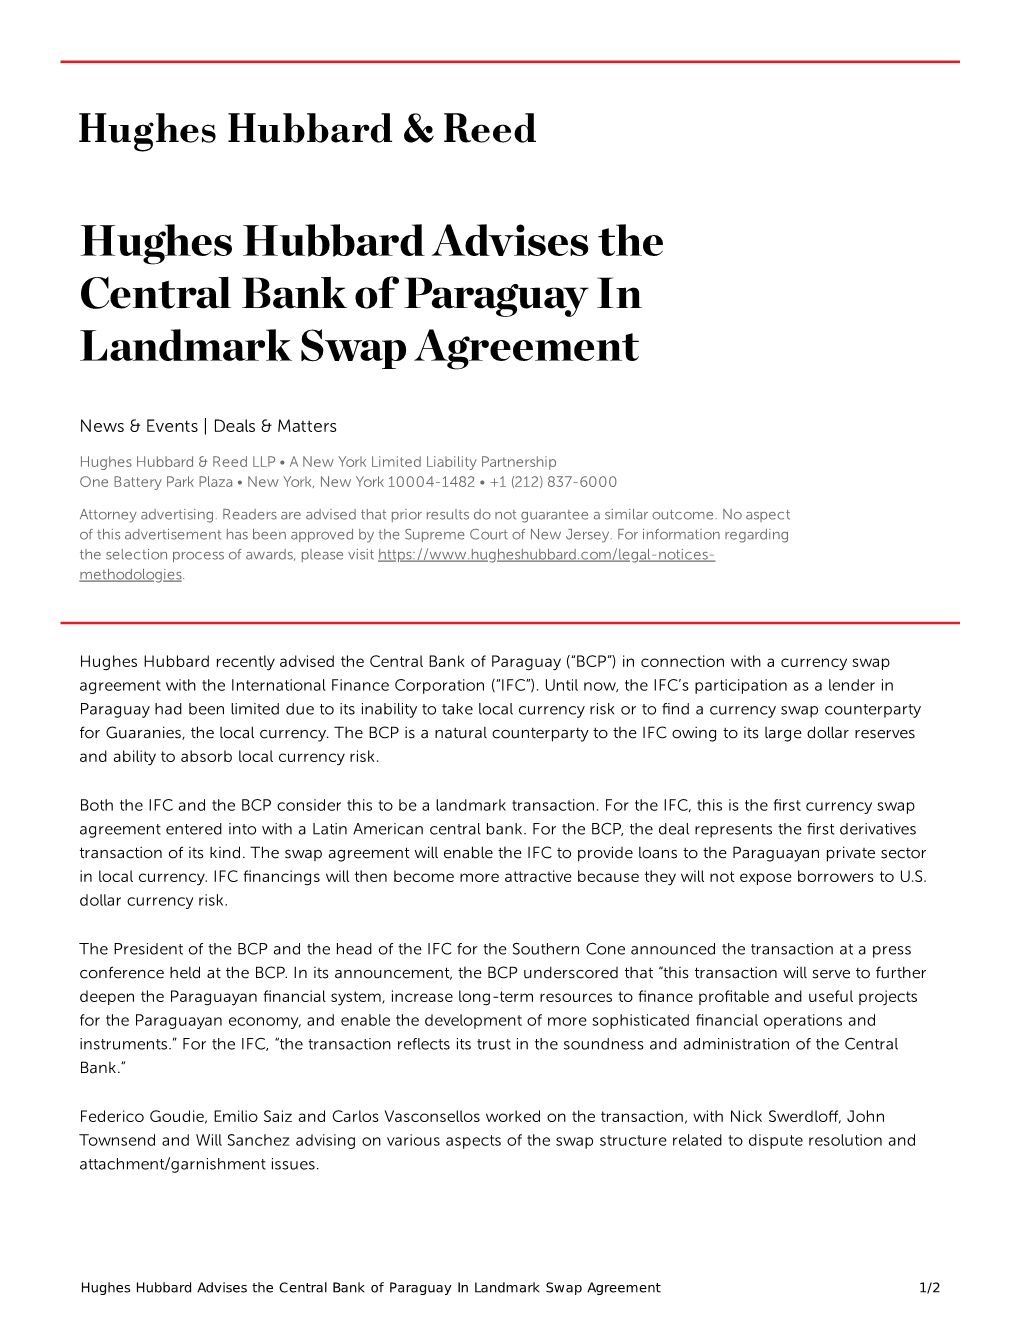 Hughes Hubbard Advises the Central Bank of Paraguay in Landmark Swap Agreement